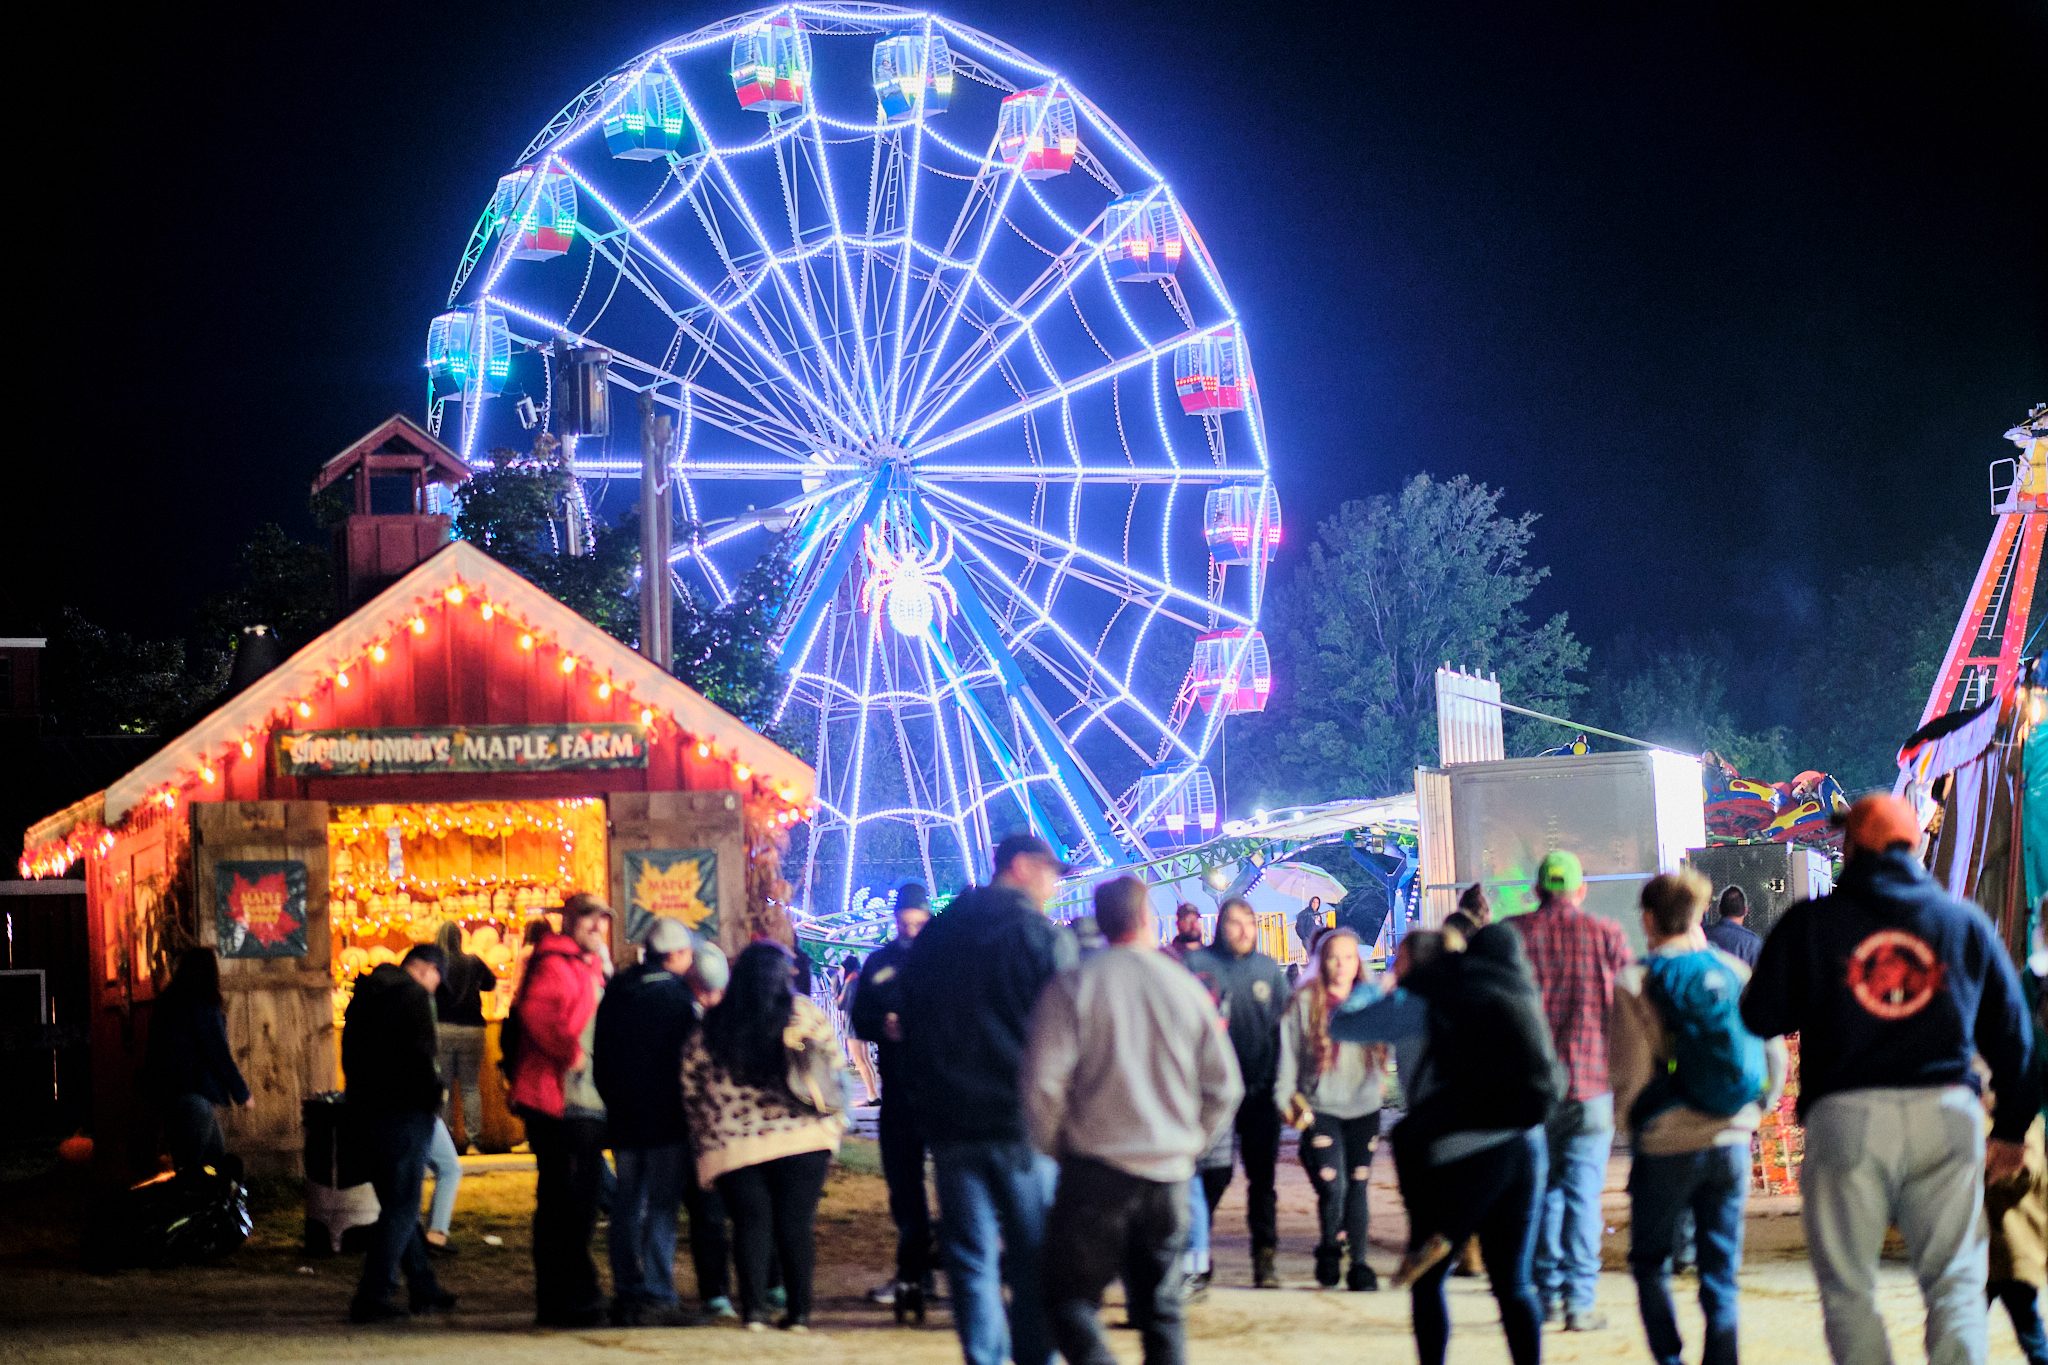 Nighttime scene at a fair with people gathered in front of a brightly lit Ferris wheel